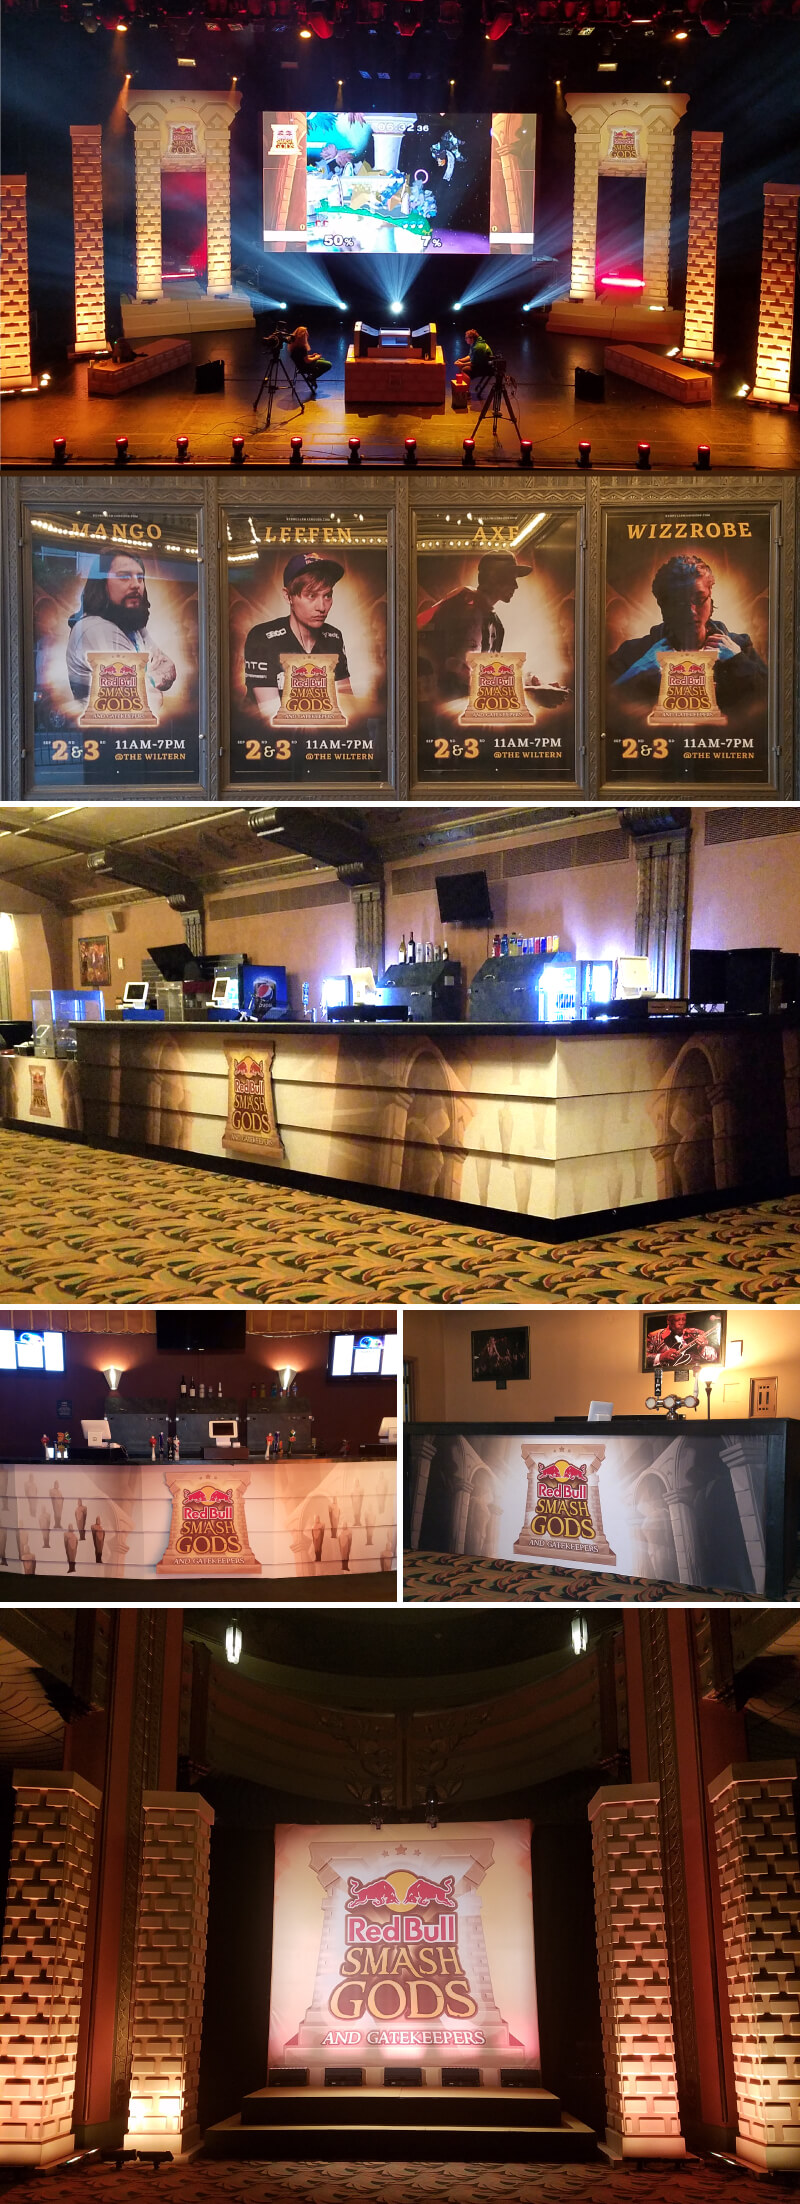 We fabricated and installed all these custom graphics for the “Red Bull Smash Gods and Gate Keepers” event